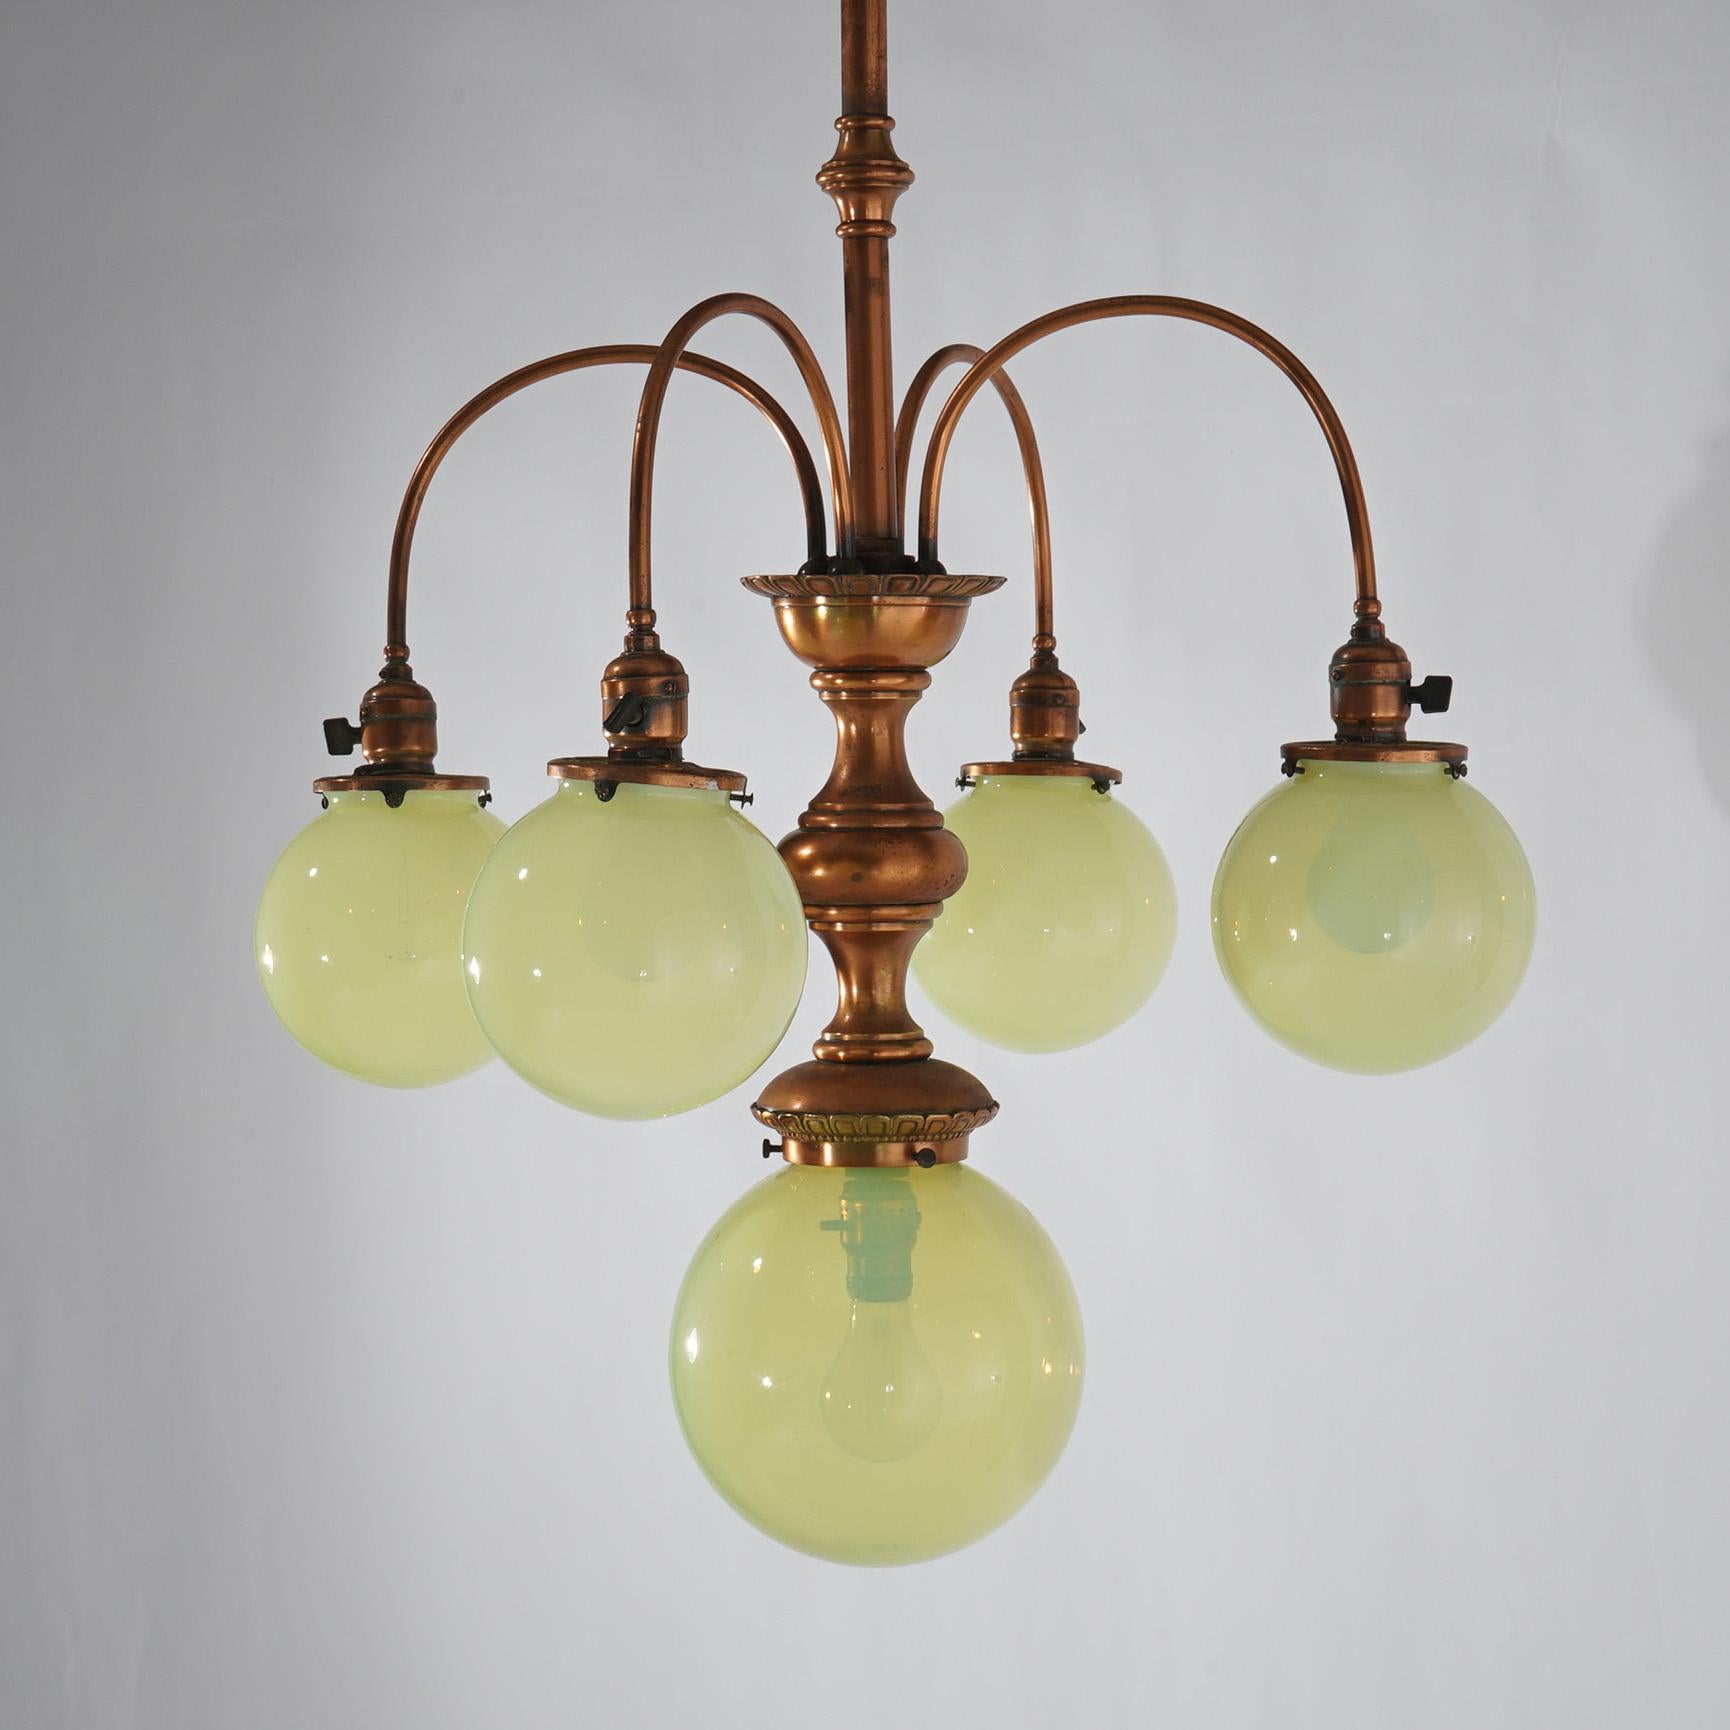 Antique Arts & Crafts Copper with Brass Five Light Chandelier Fixture c1910 In Good Condition For Sale In Big Flats, NY